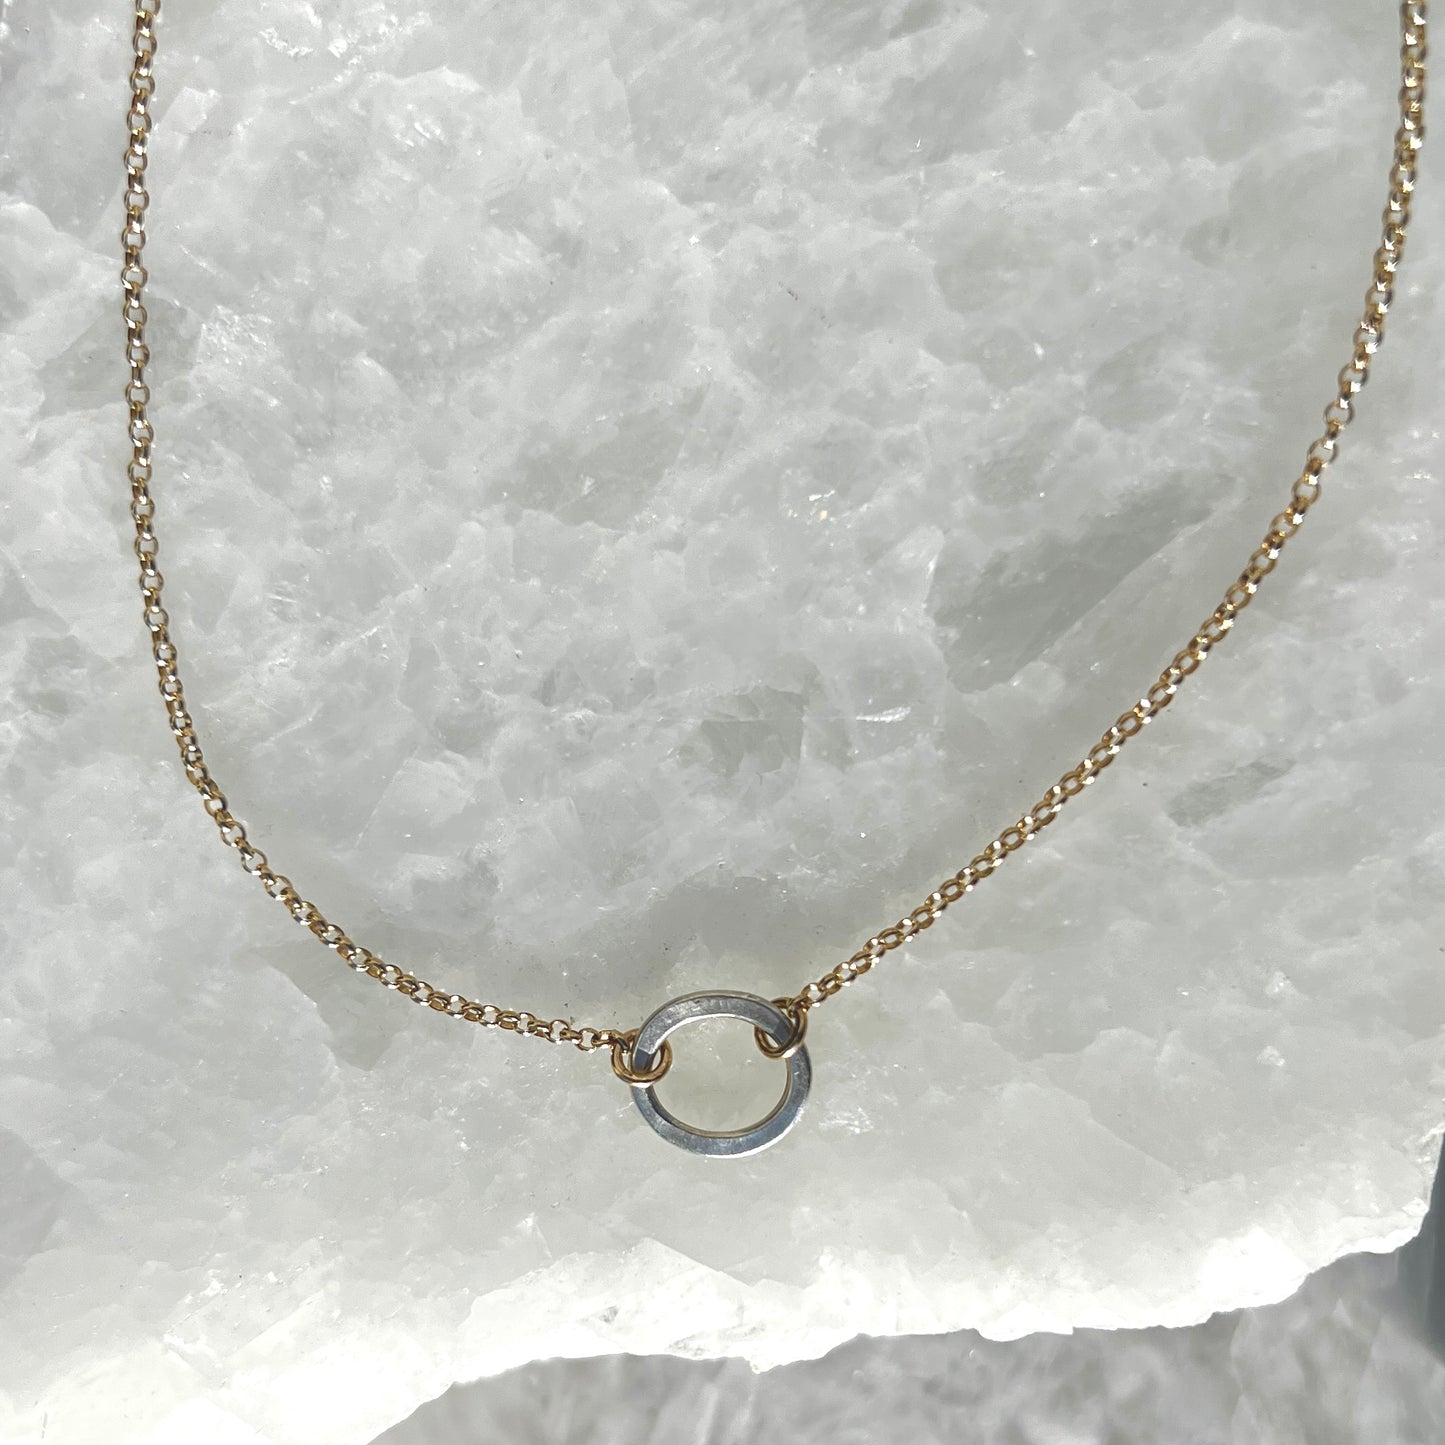 Kai Petite Necklace Gold Filled Chain - Mixed Metal